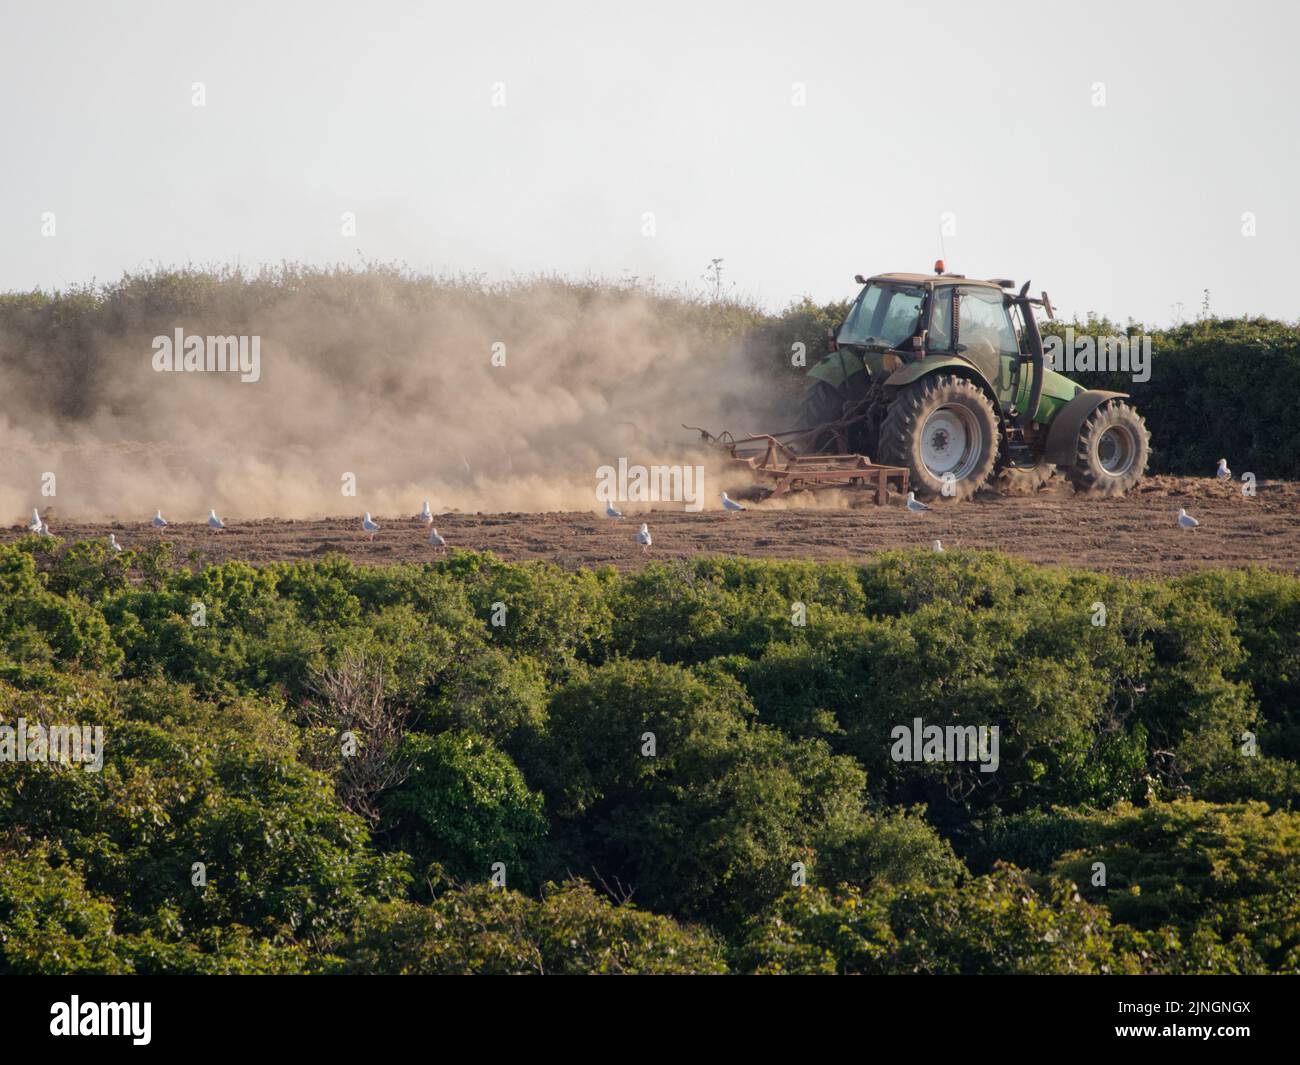 UK Weather, Crantock, Cornwall, UK. A farmer raises large dust clouds from his arid soil as he harrows the parched soil in hope of being able to sow crops. The Environment Agency meets on Friday to decide if drought conditions on water usage should be introduced in the south west of England. 11th August 2022. Robert Taylor Alamy Live News Stock Photo